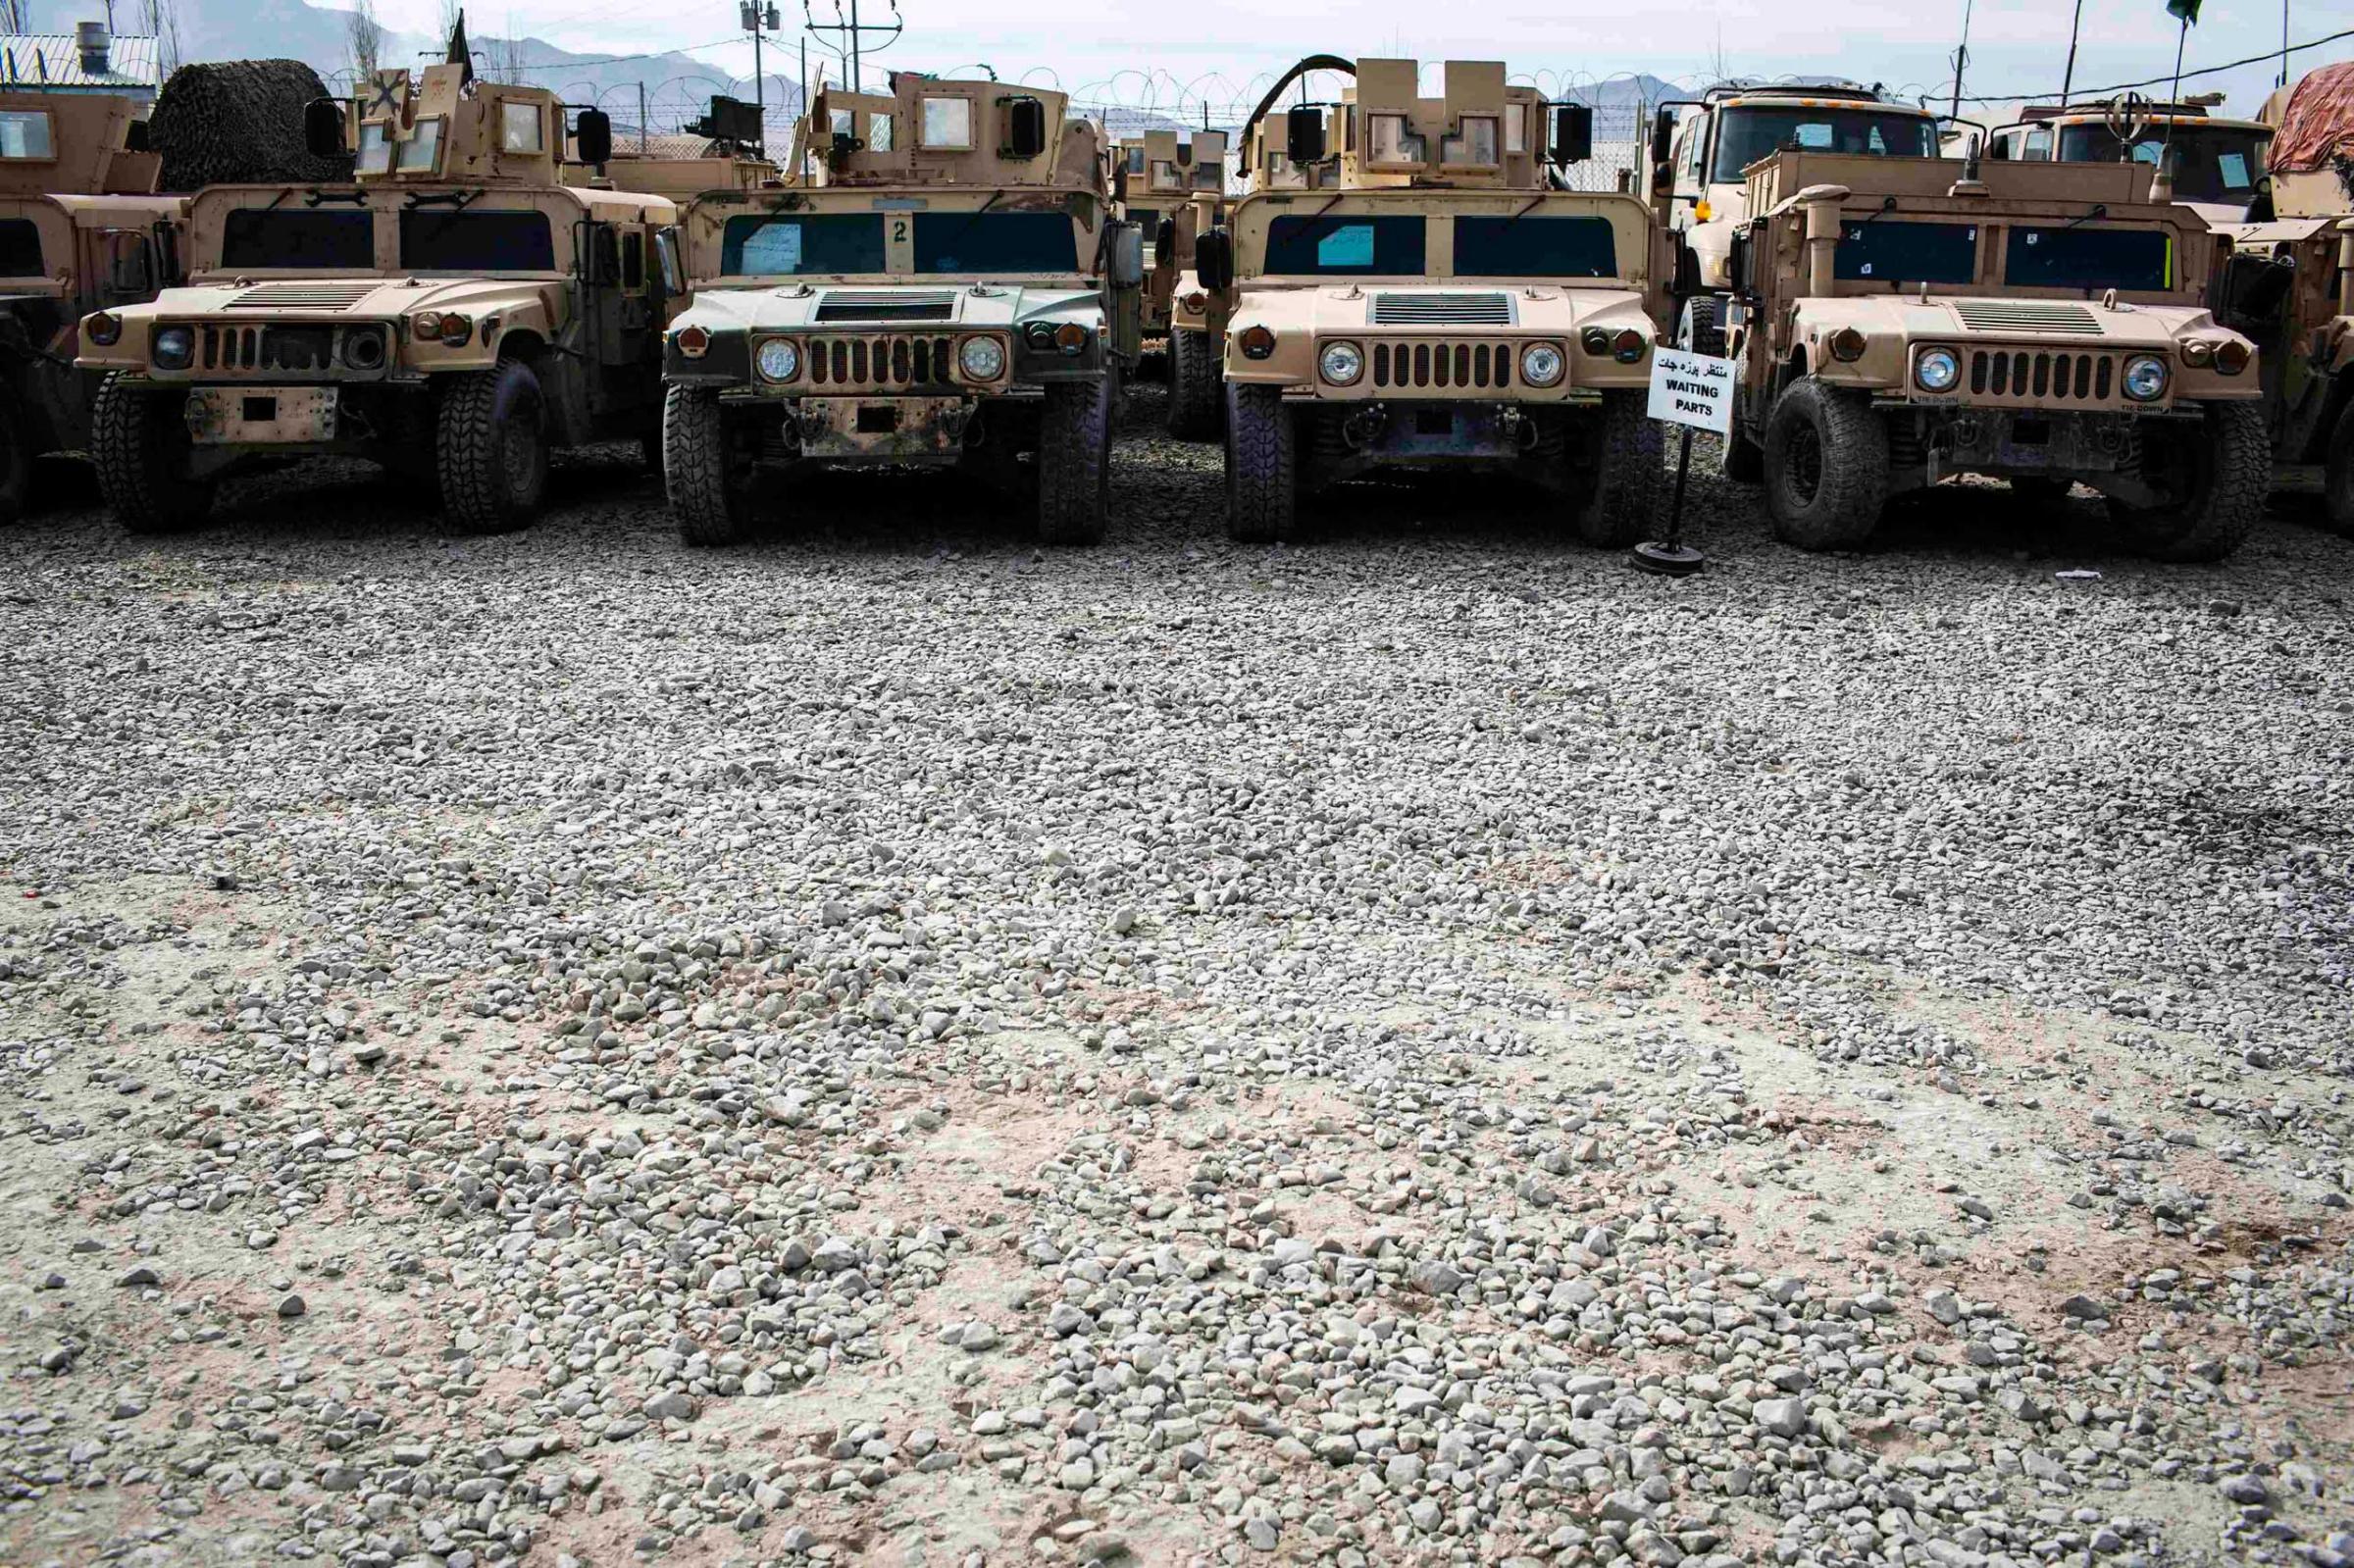 Humvees for the Afghan National Army are lined up waiting for parts to be repaired at the Afghan National Army headquarters for the 203rd Corps in the Paktia province of Afghanistan